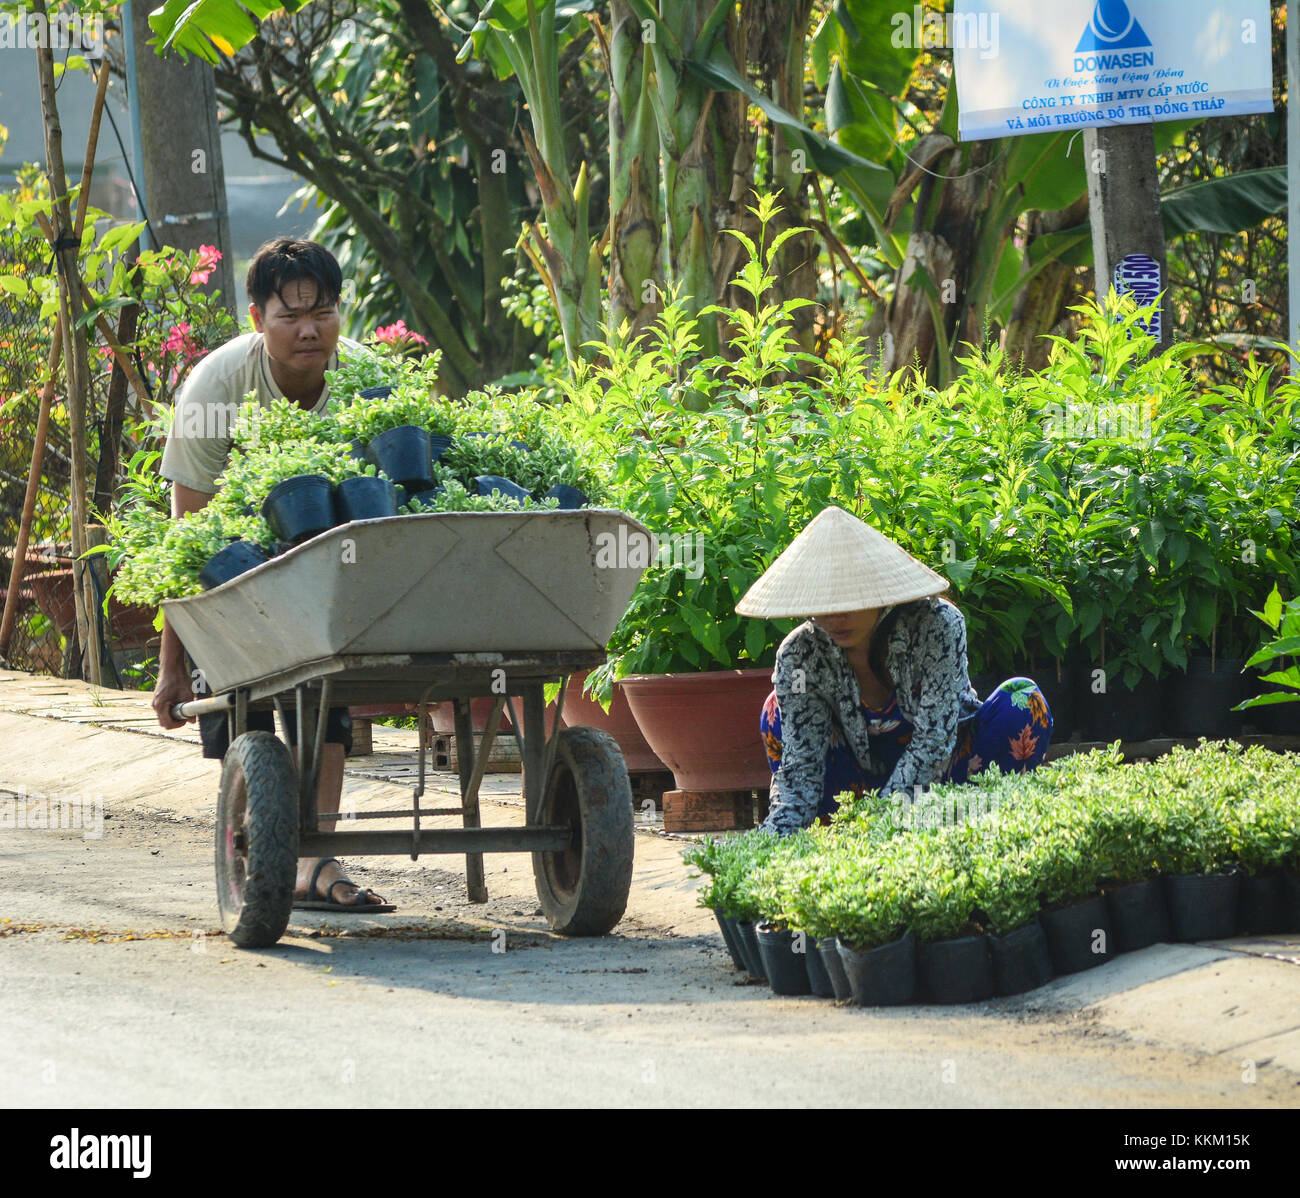 Ben Tre, Vietnam - Feb 1, 2016. People working at the flower plantation in Ben Tre, Vietnam. Ben Tre is a province in the Mekong Delta area of souther Stock Photo